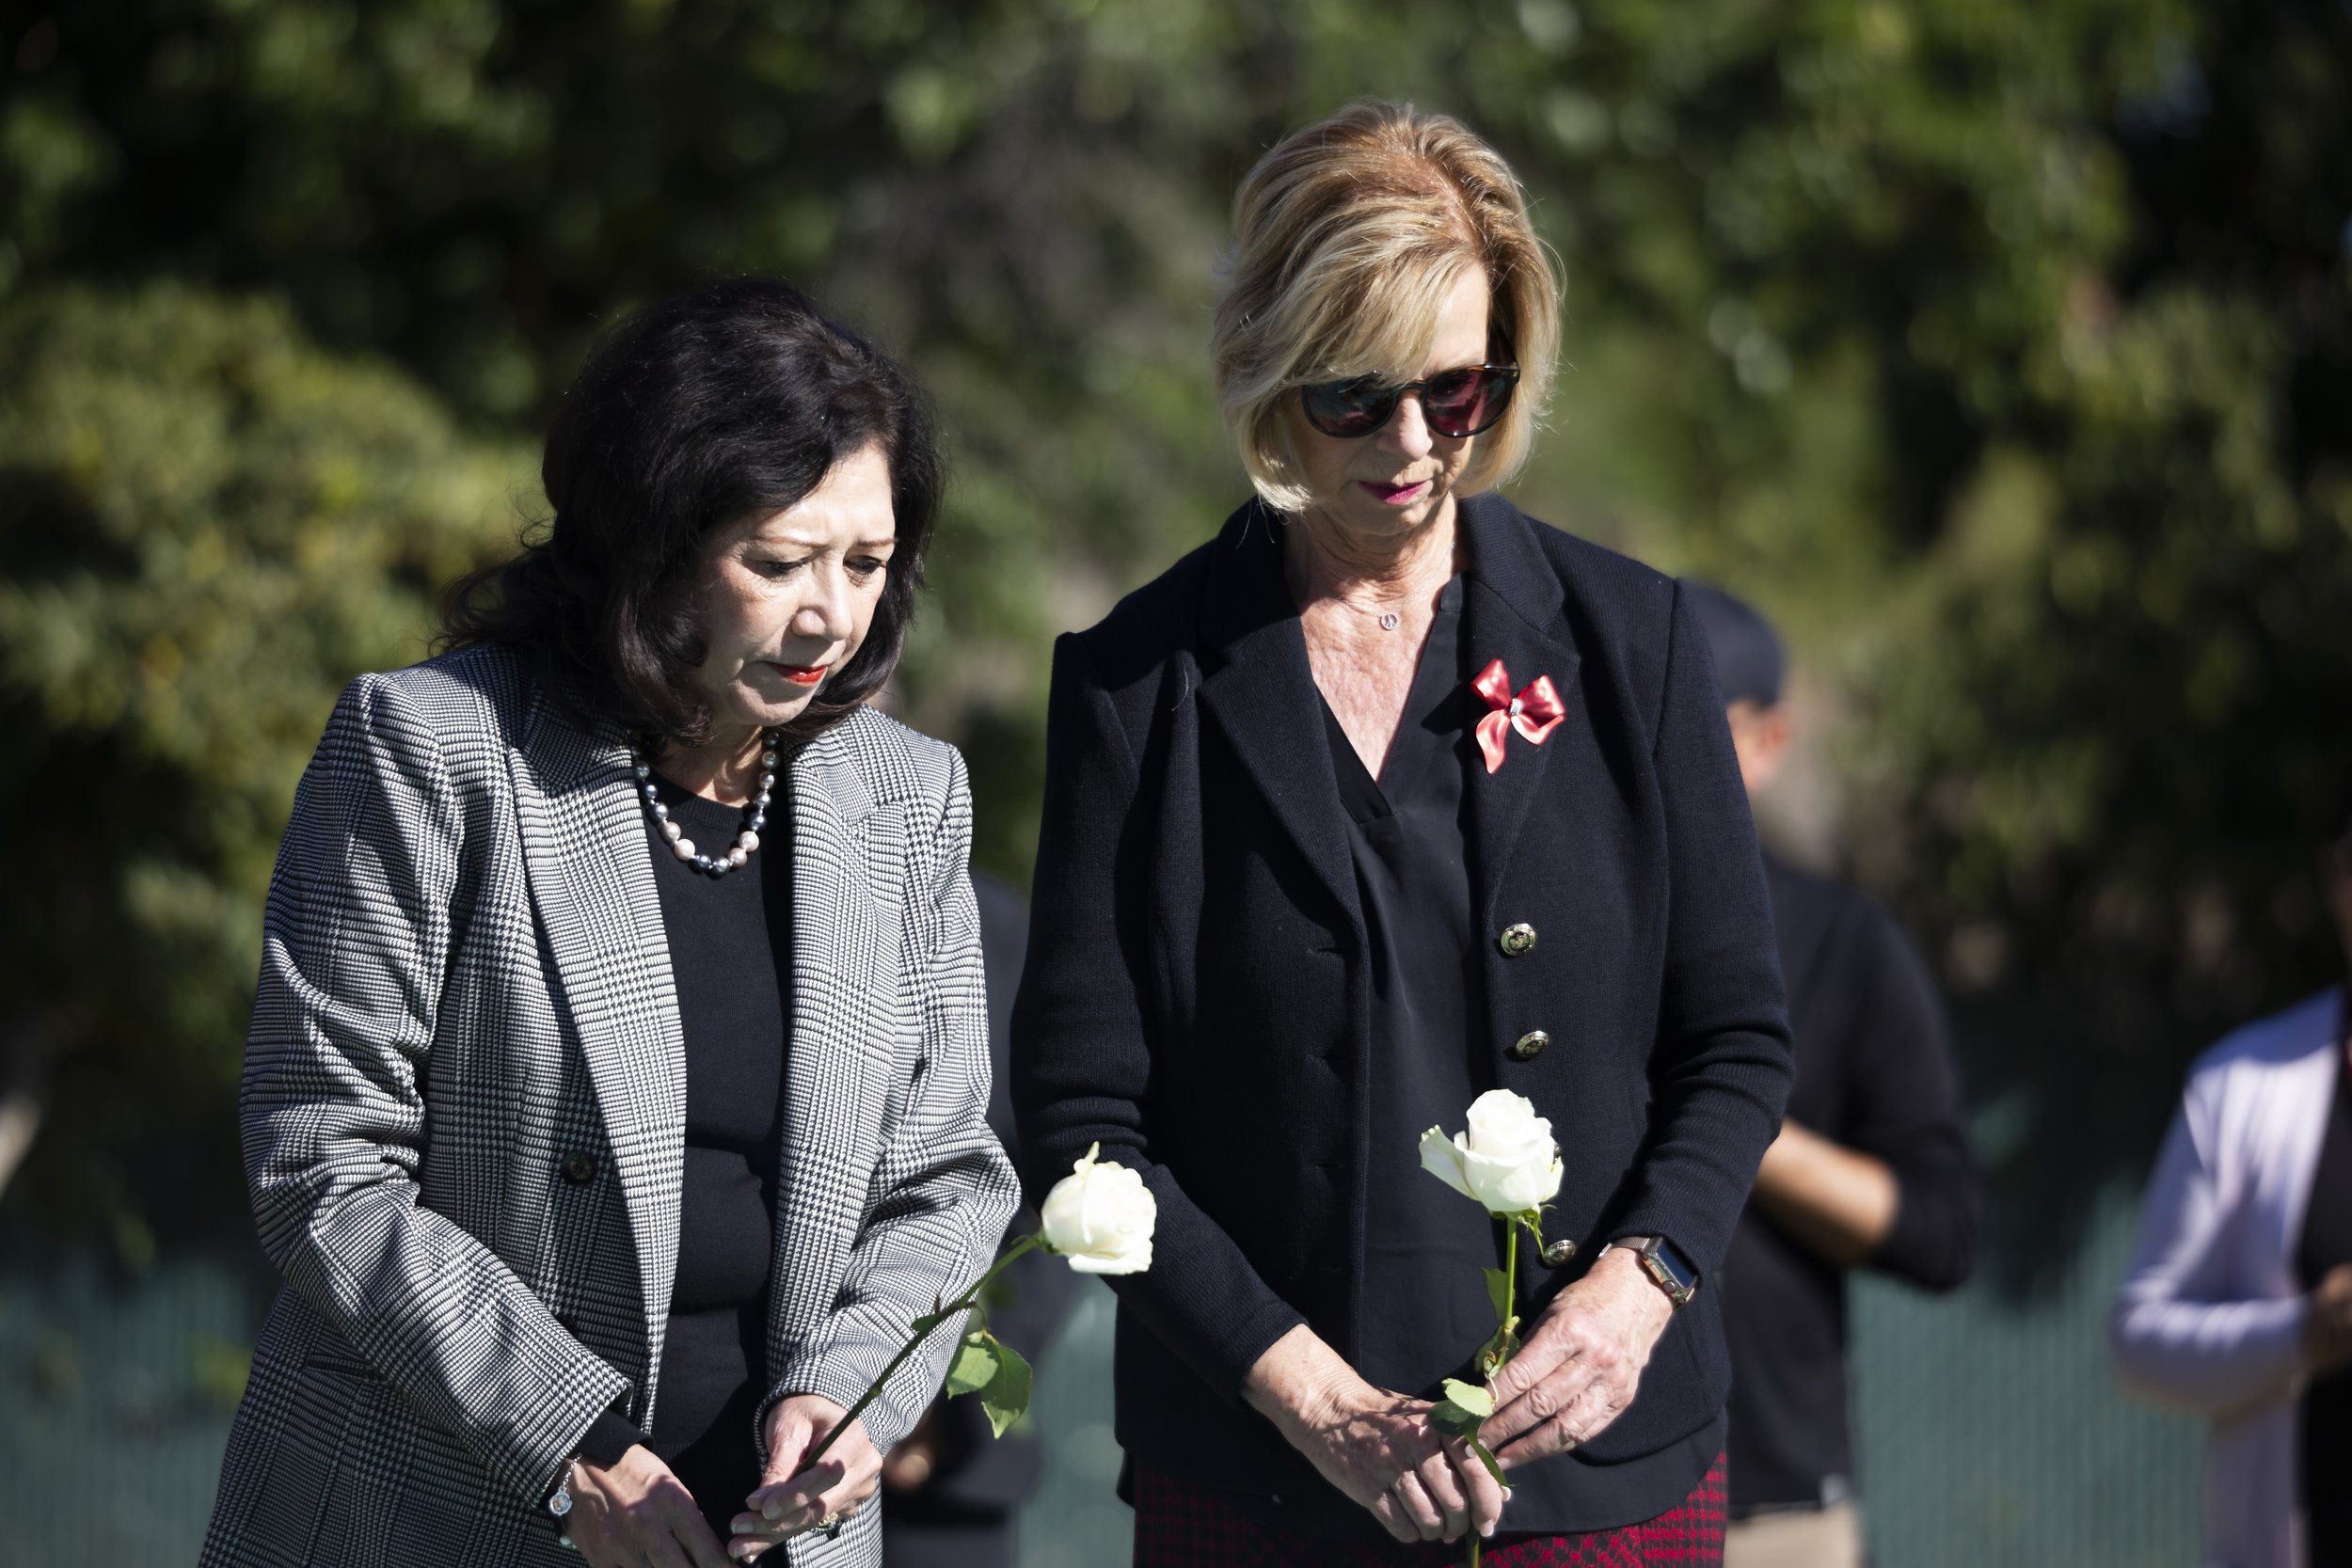  Los Angeles County Supervisor Hilda Solis (left, first district) and Janice Hahn (fourth district) place white roses on the grave marking the unclaimed dead from 2020 during the LA County Ceremony of the Unclaimed Dead at the LA County Cemetery, in 